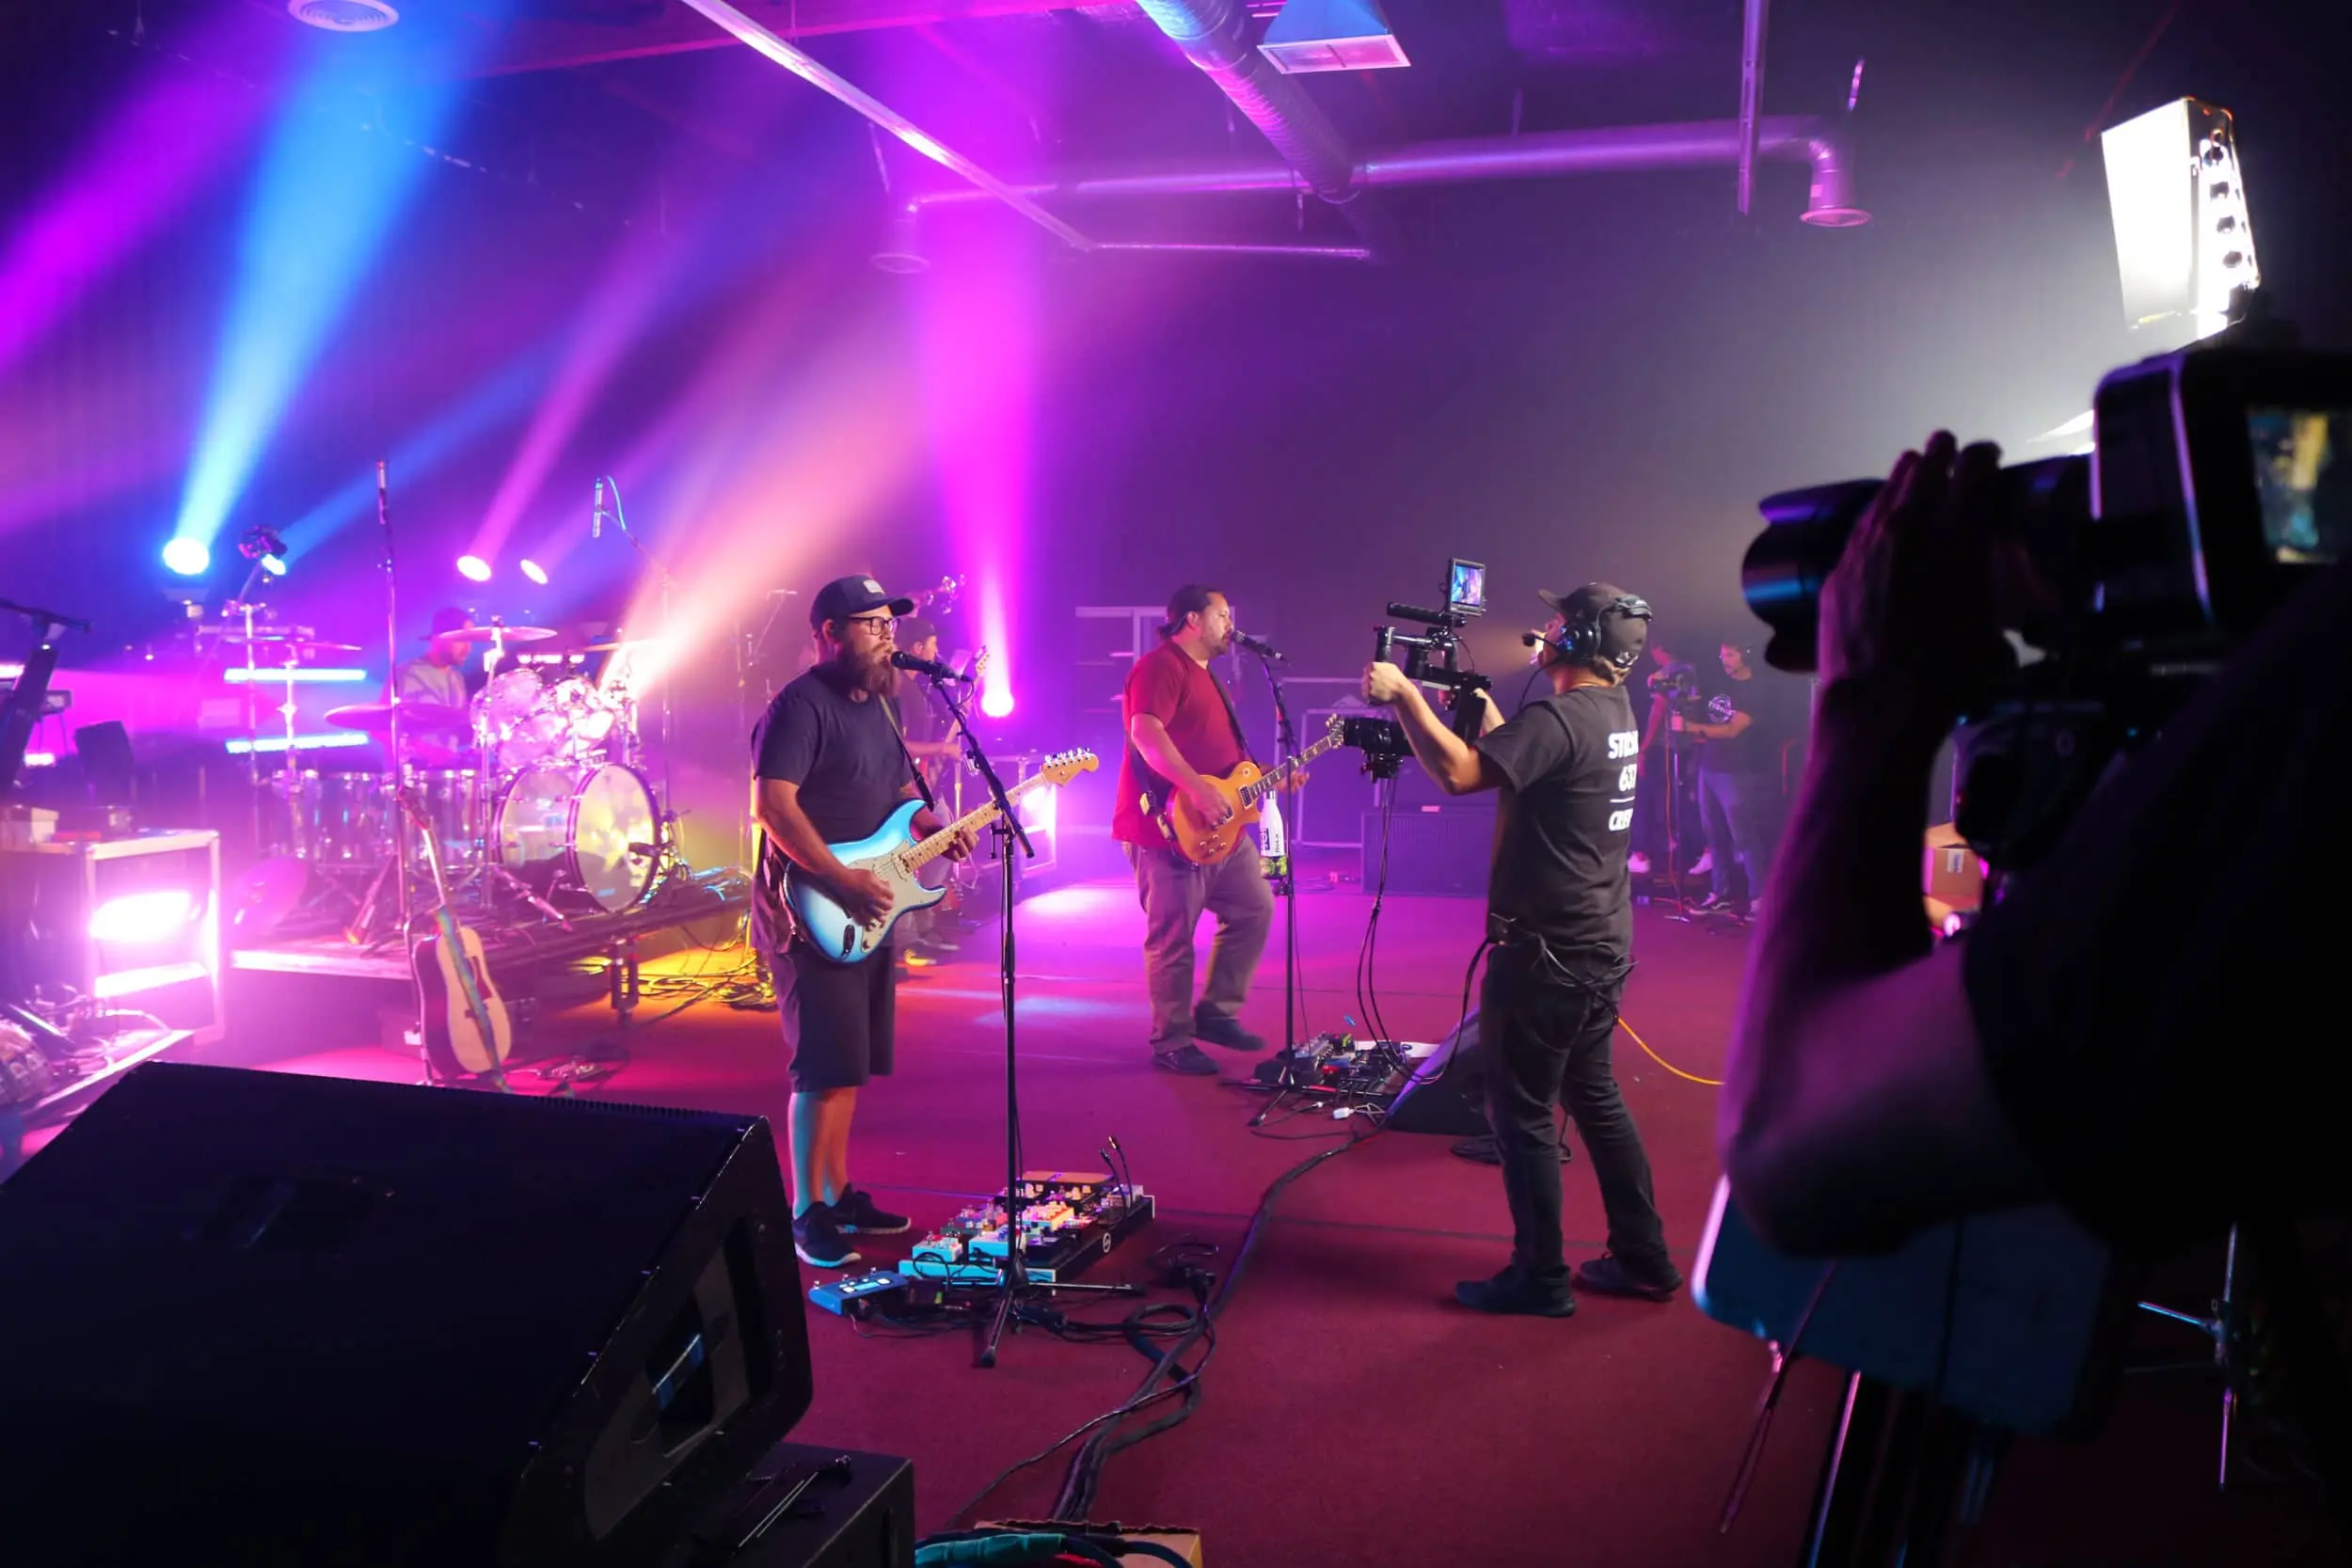 A band performs on stage under pink lighting while a cameraman records the event.